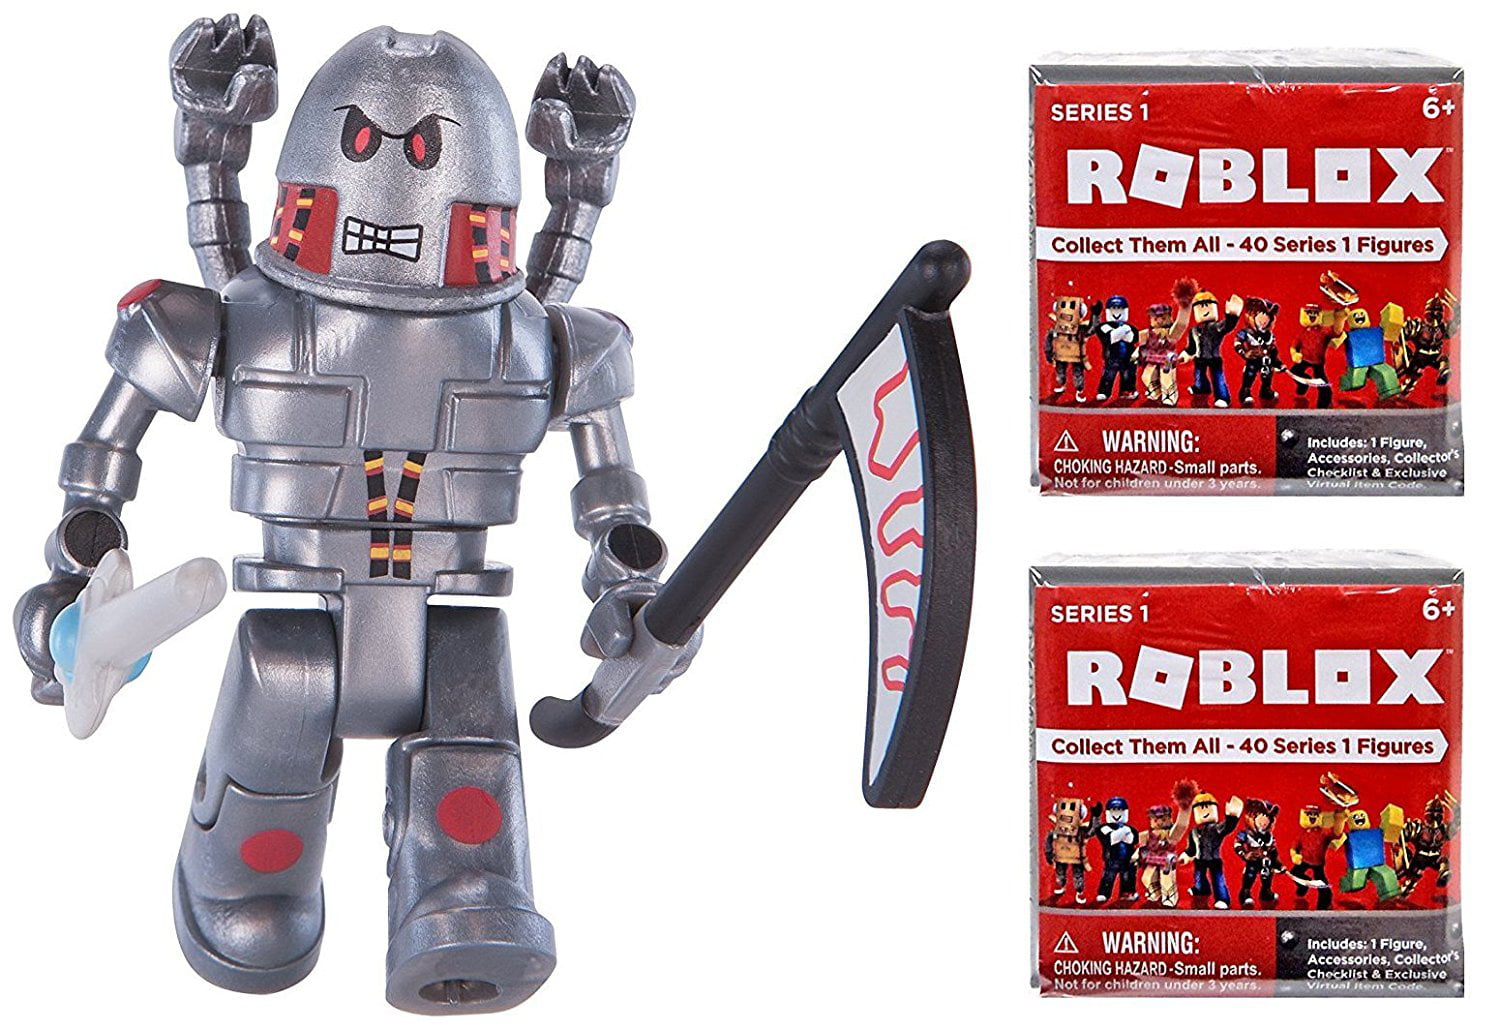 Roblox Action Bundle Includes 1 Circuit Breaker Figure Pack Set Of 2 Series 1 Mystery Box Toys Bundle Includes 1 Circuit Breaker Figure Pack 2 Series By Action Media Gifts Walmart Com Walmart Com - check out the roblox digital collectors checklist which